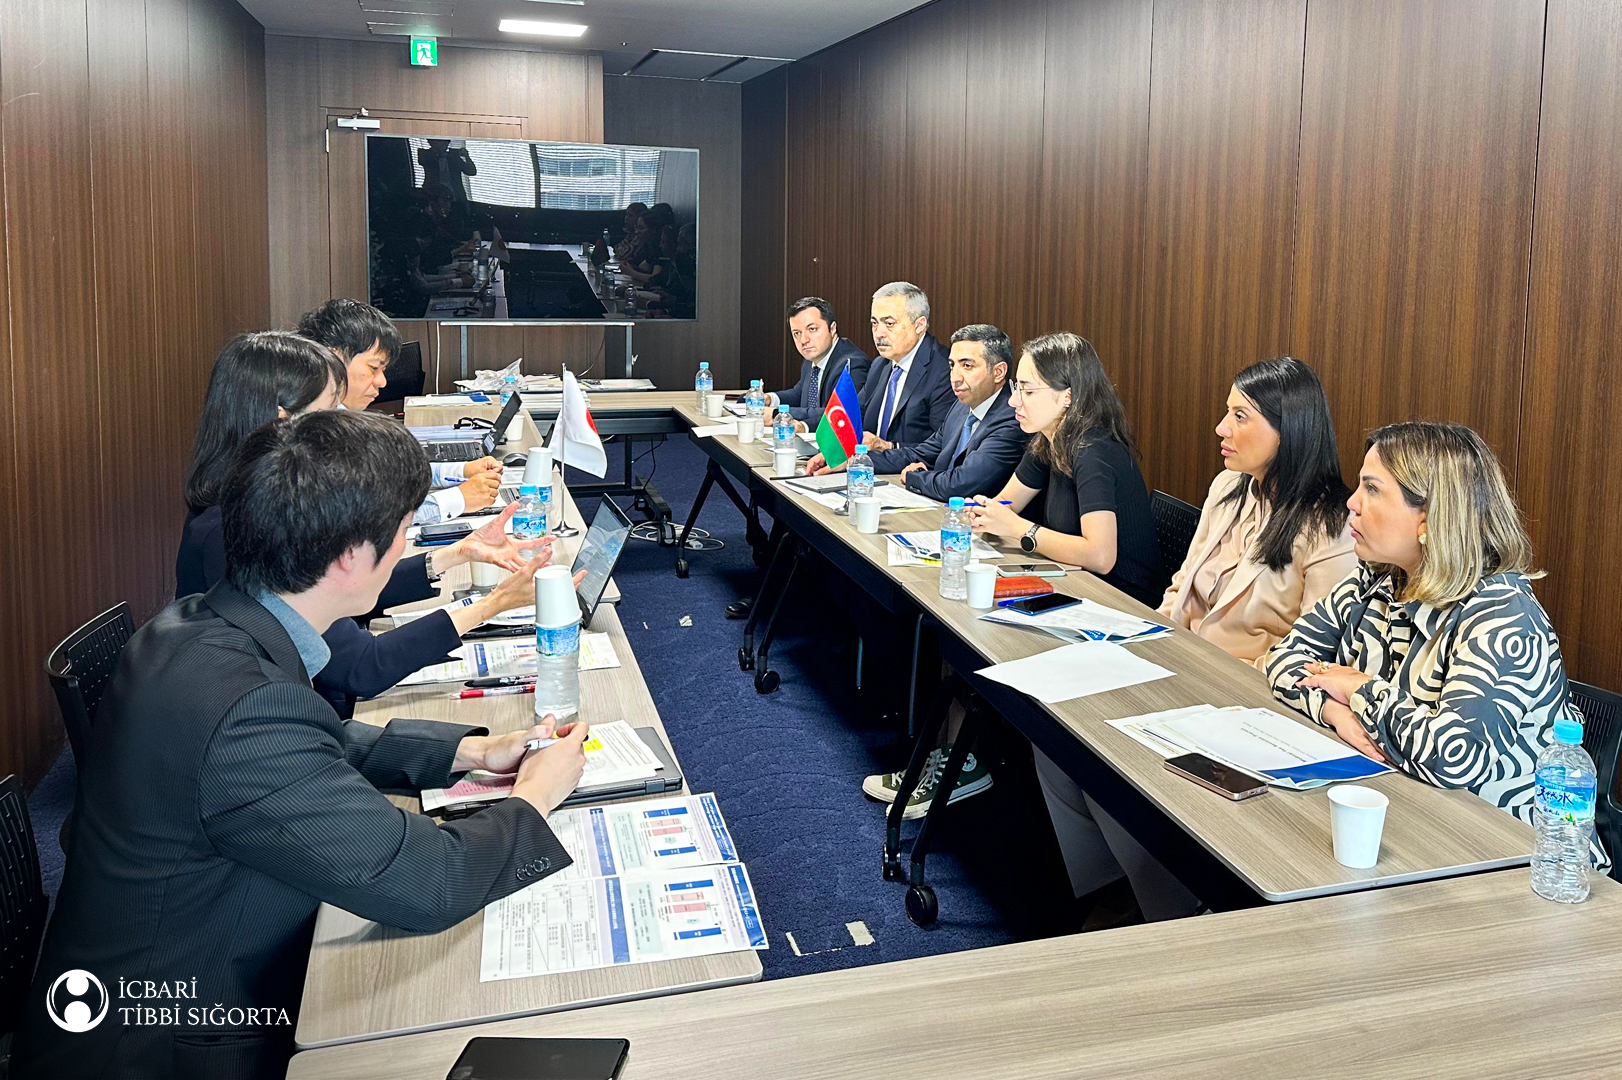 State Agency for Compulsory Medical Insurance of Azerbaijan visited Japan for experience exchange